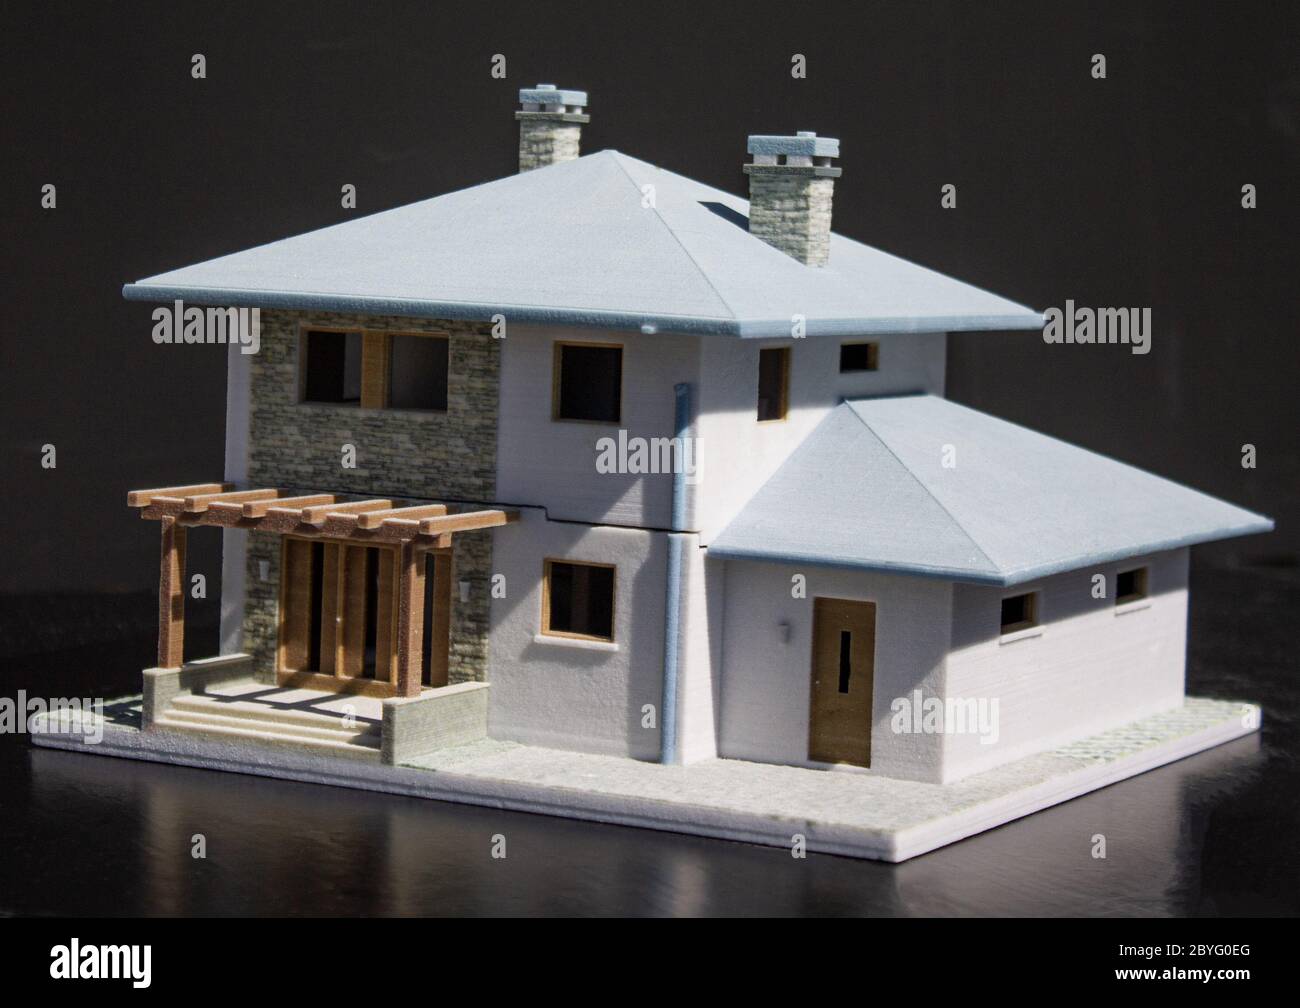 A 3D printed architecture model house in gypsum. Stock Photo